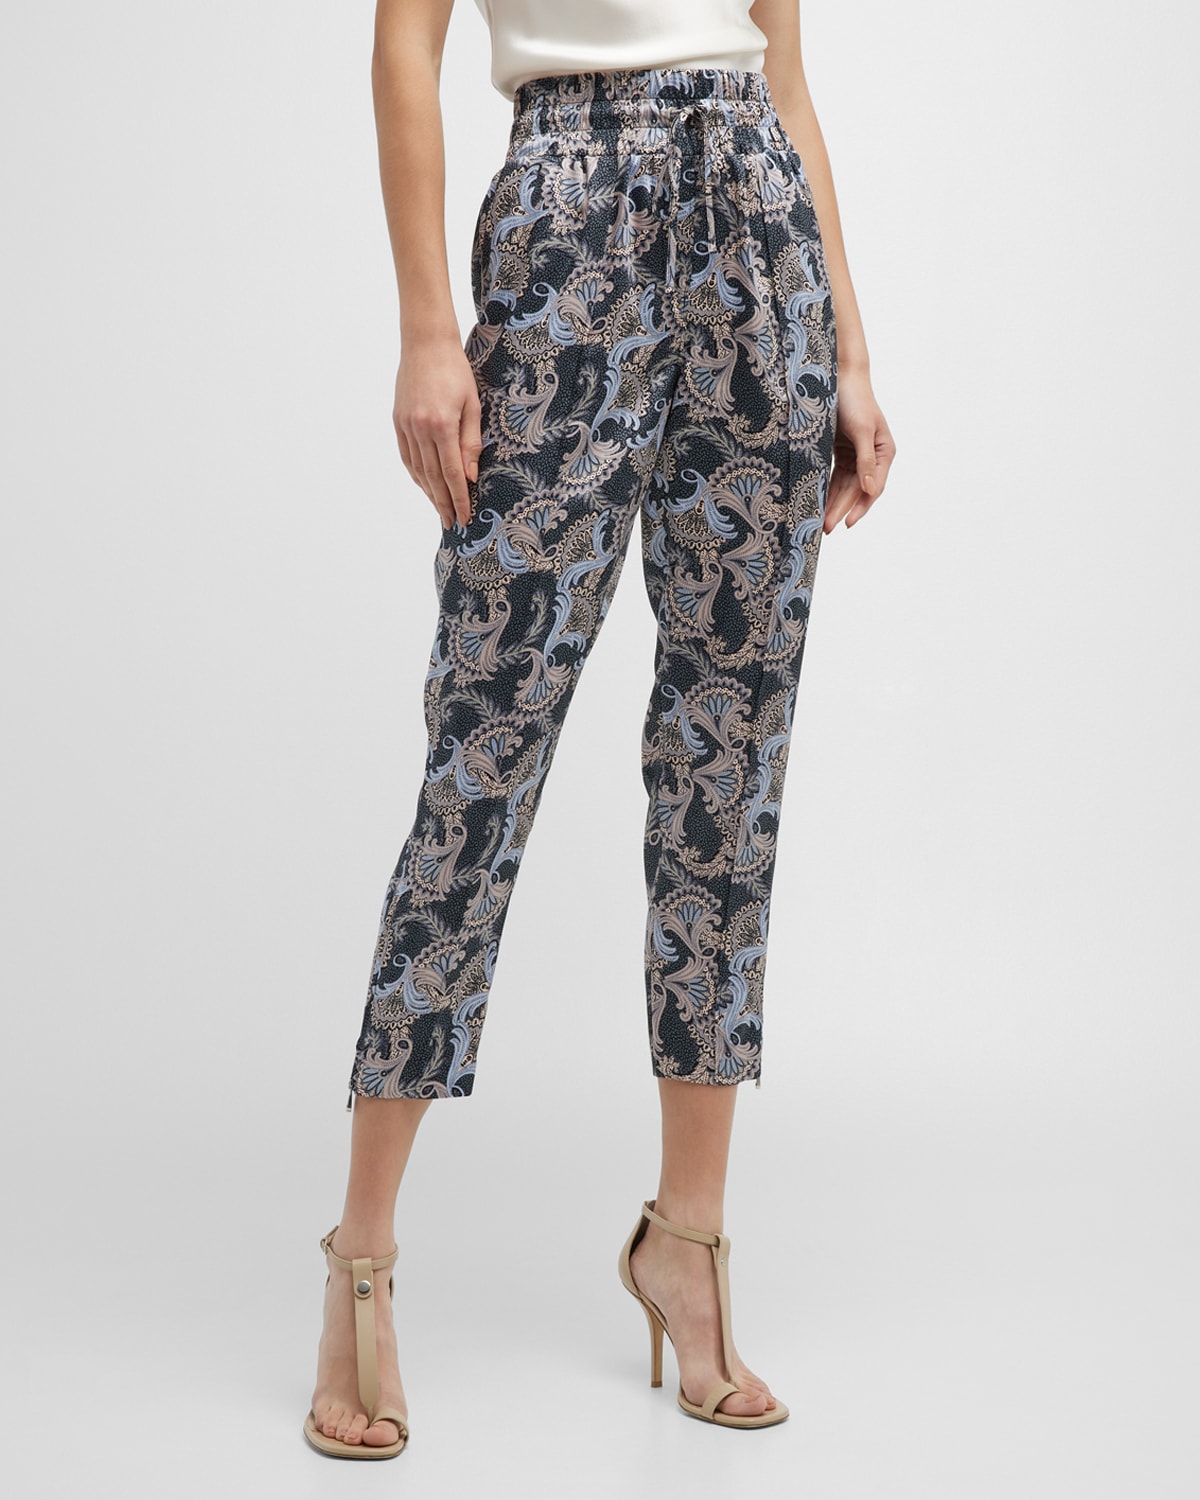 4th & Reckless Emery Lace Pants